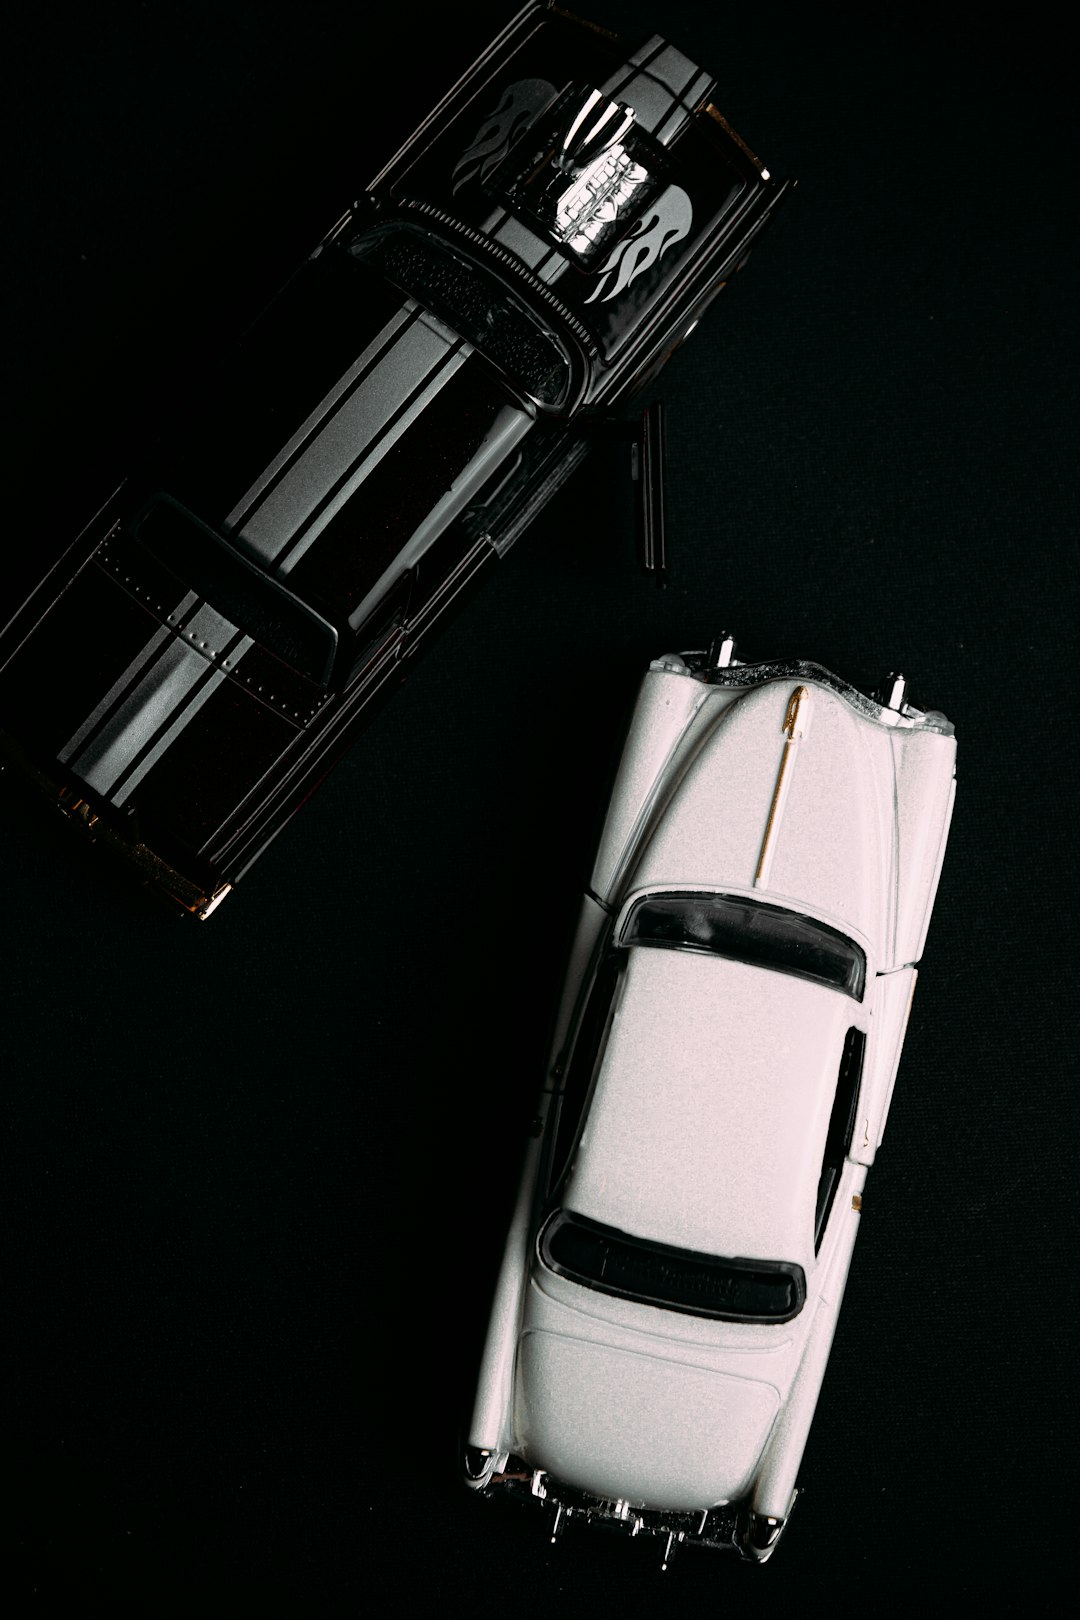 white and black car scale model